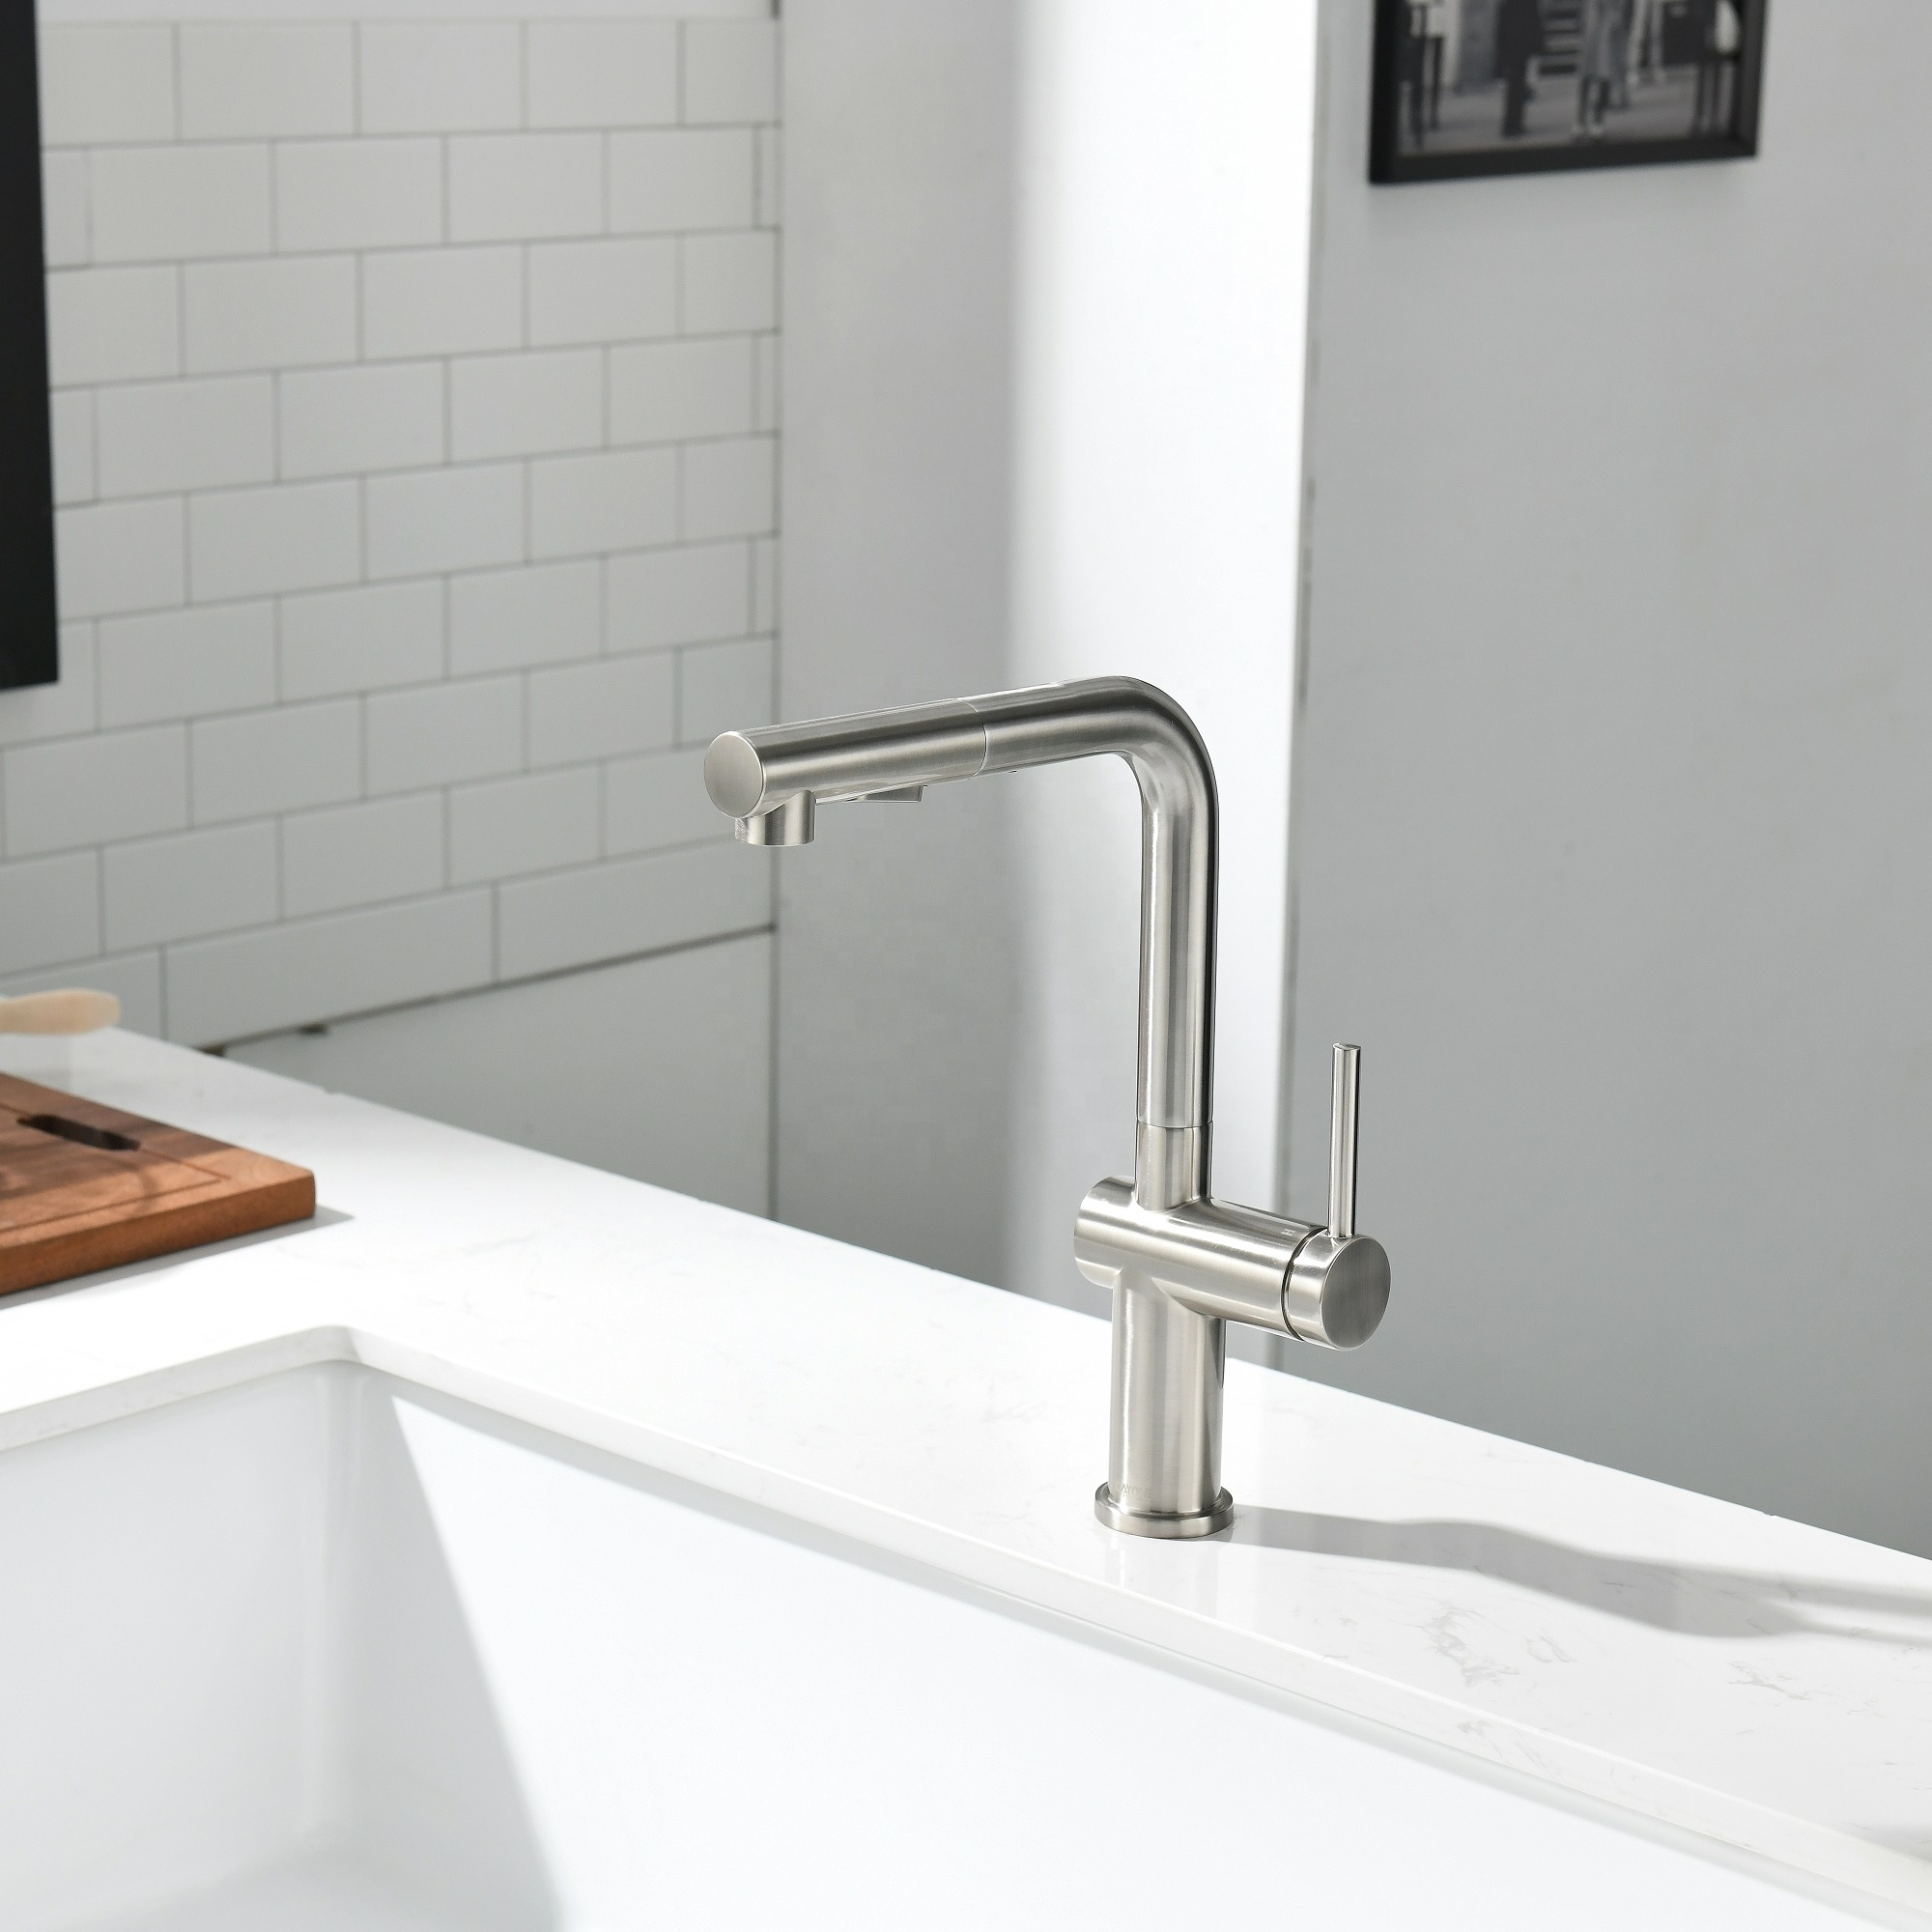 European Style Brushed Kitchen Faucet Kitchen Sink Faucet Pull Out Kitchen Faucet New